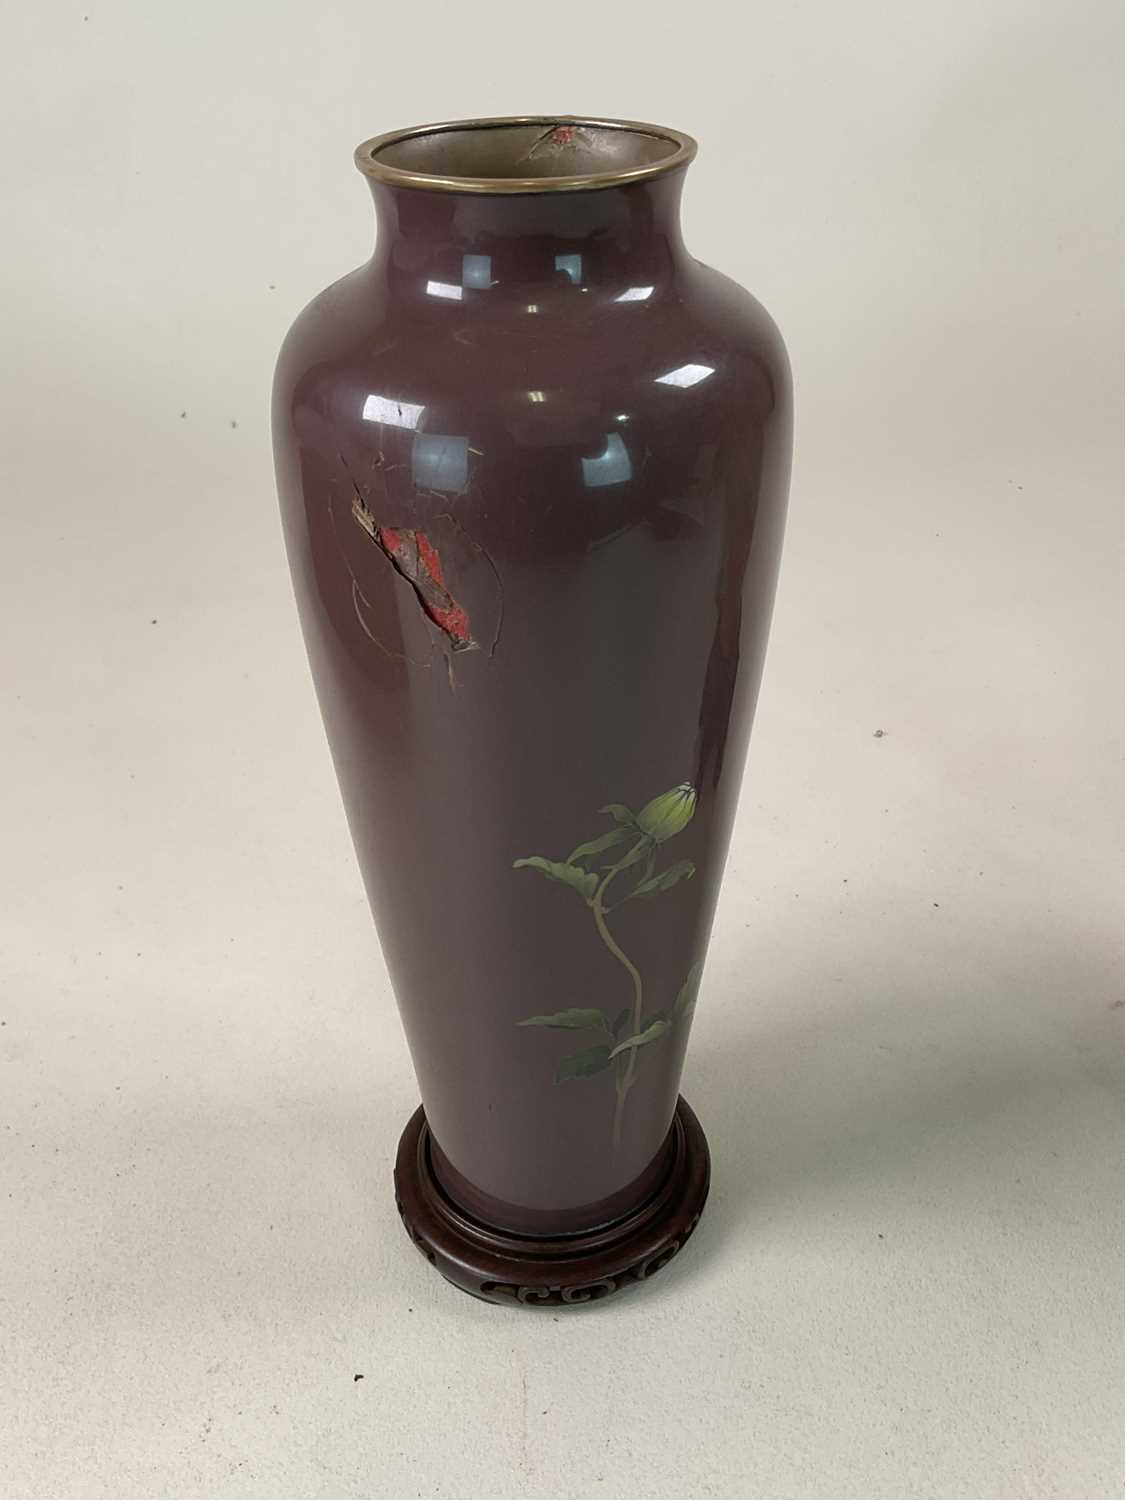 A Japanese cloisonné vase in wooden case by the Ando company, vase height 31cm, a Japanese ceramic - Image 4 of 8